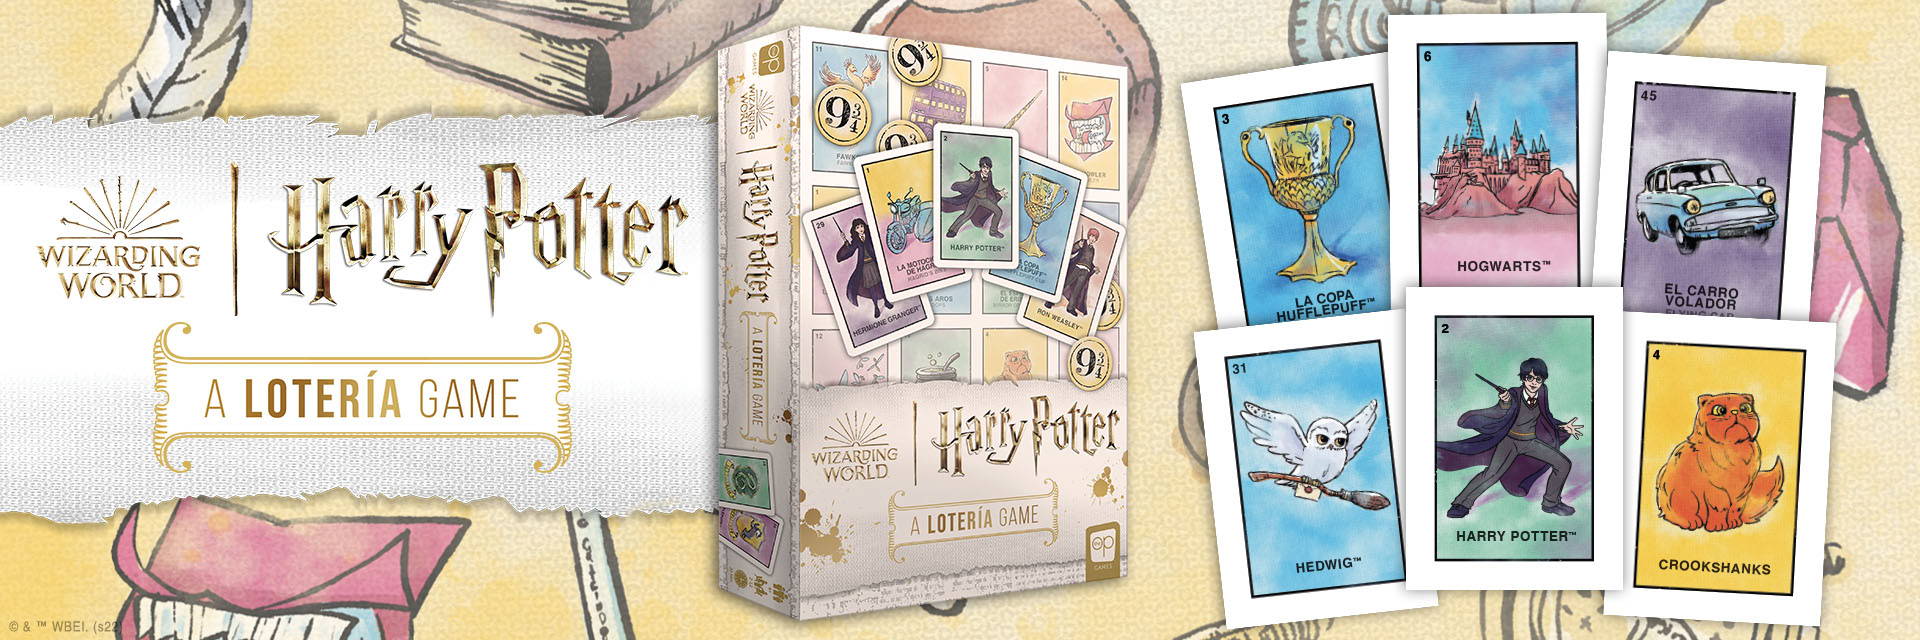 Did you know a #harrypotter #loteria existed! It's the coolest thing I